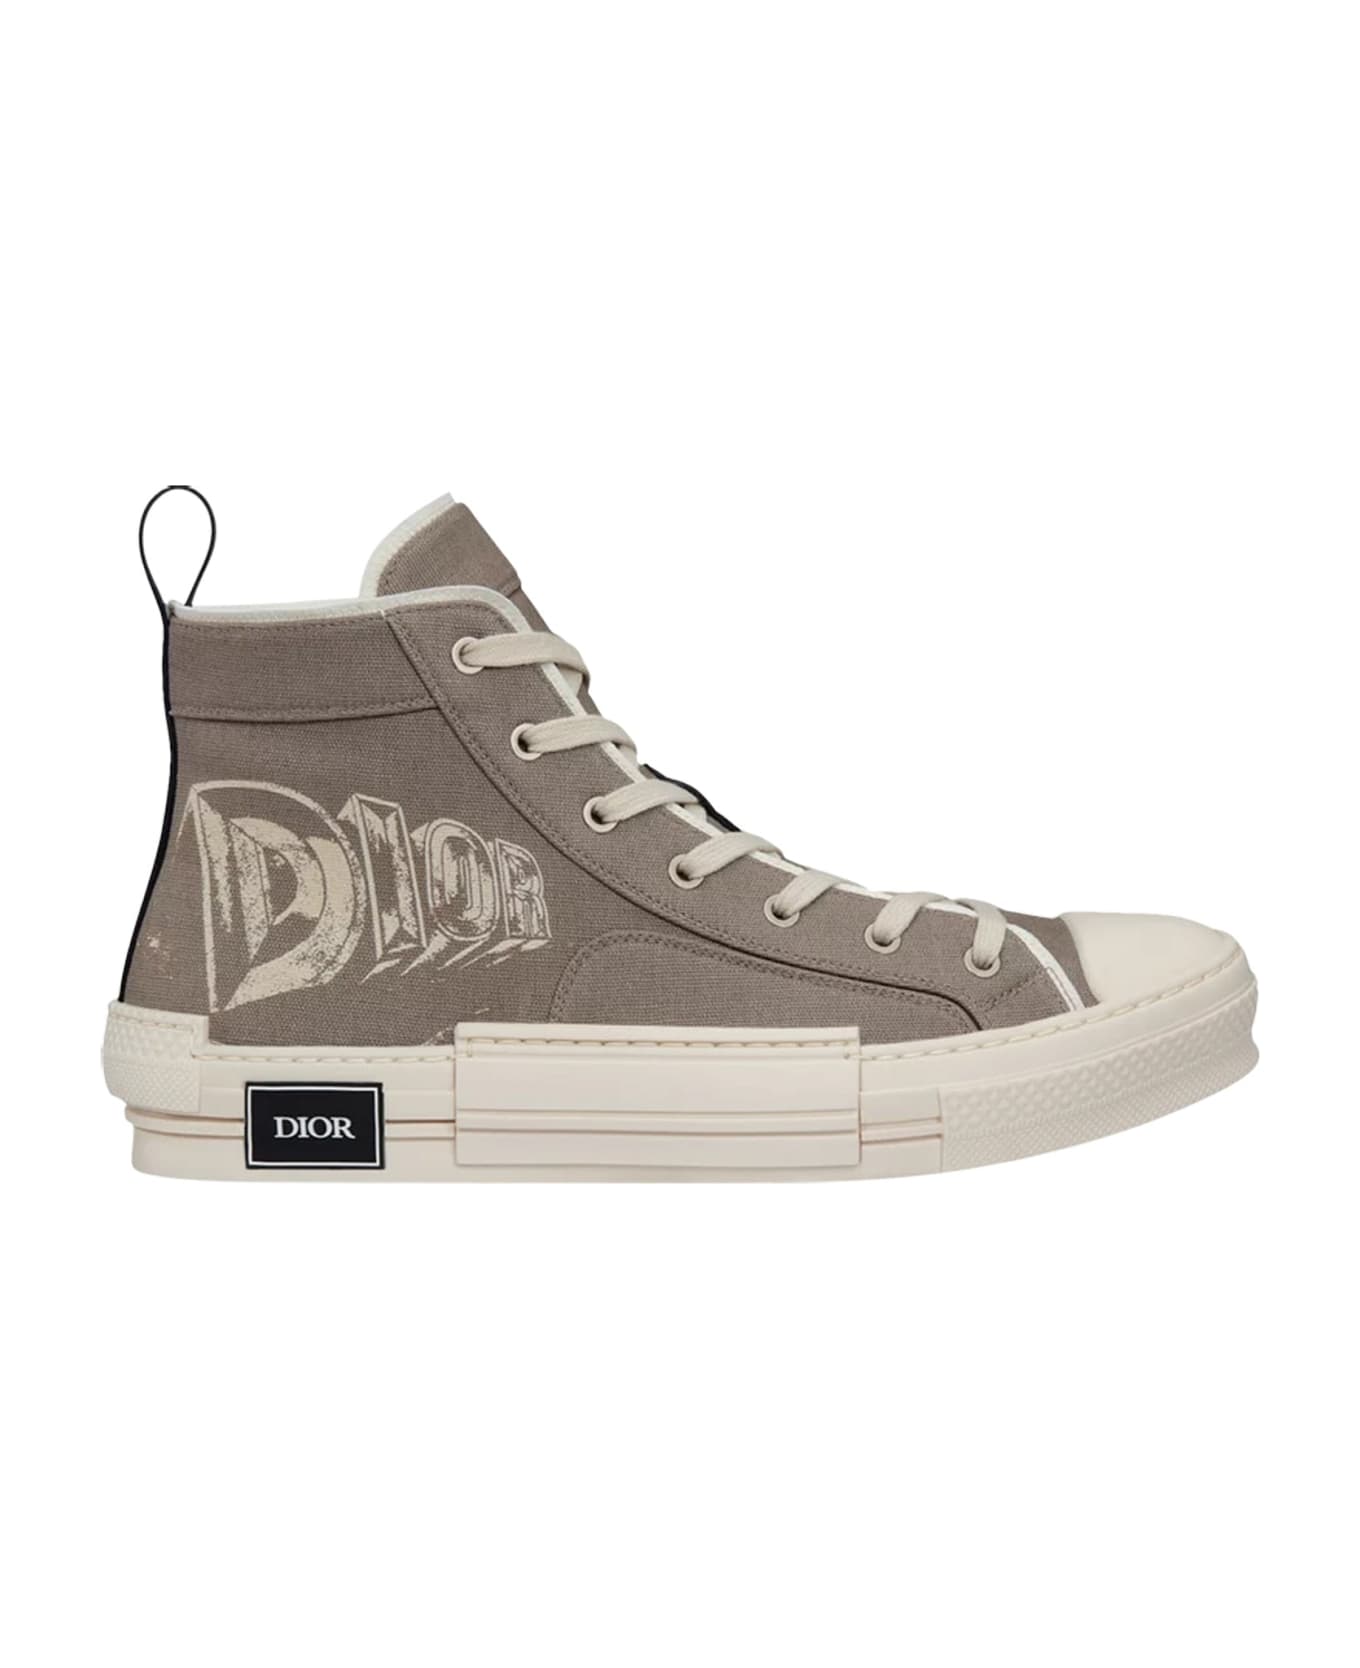 Dior Canvas Logo Sneakers - Brown スニーカー